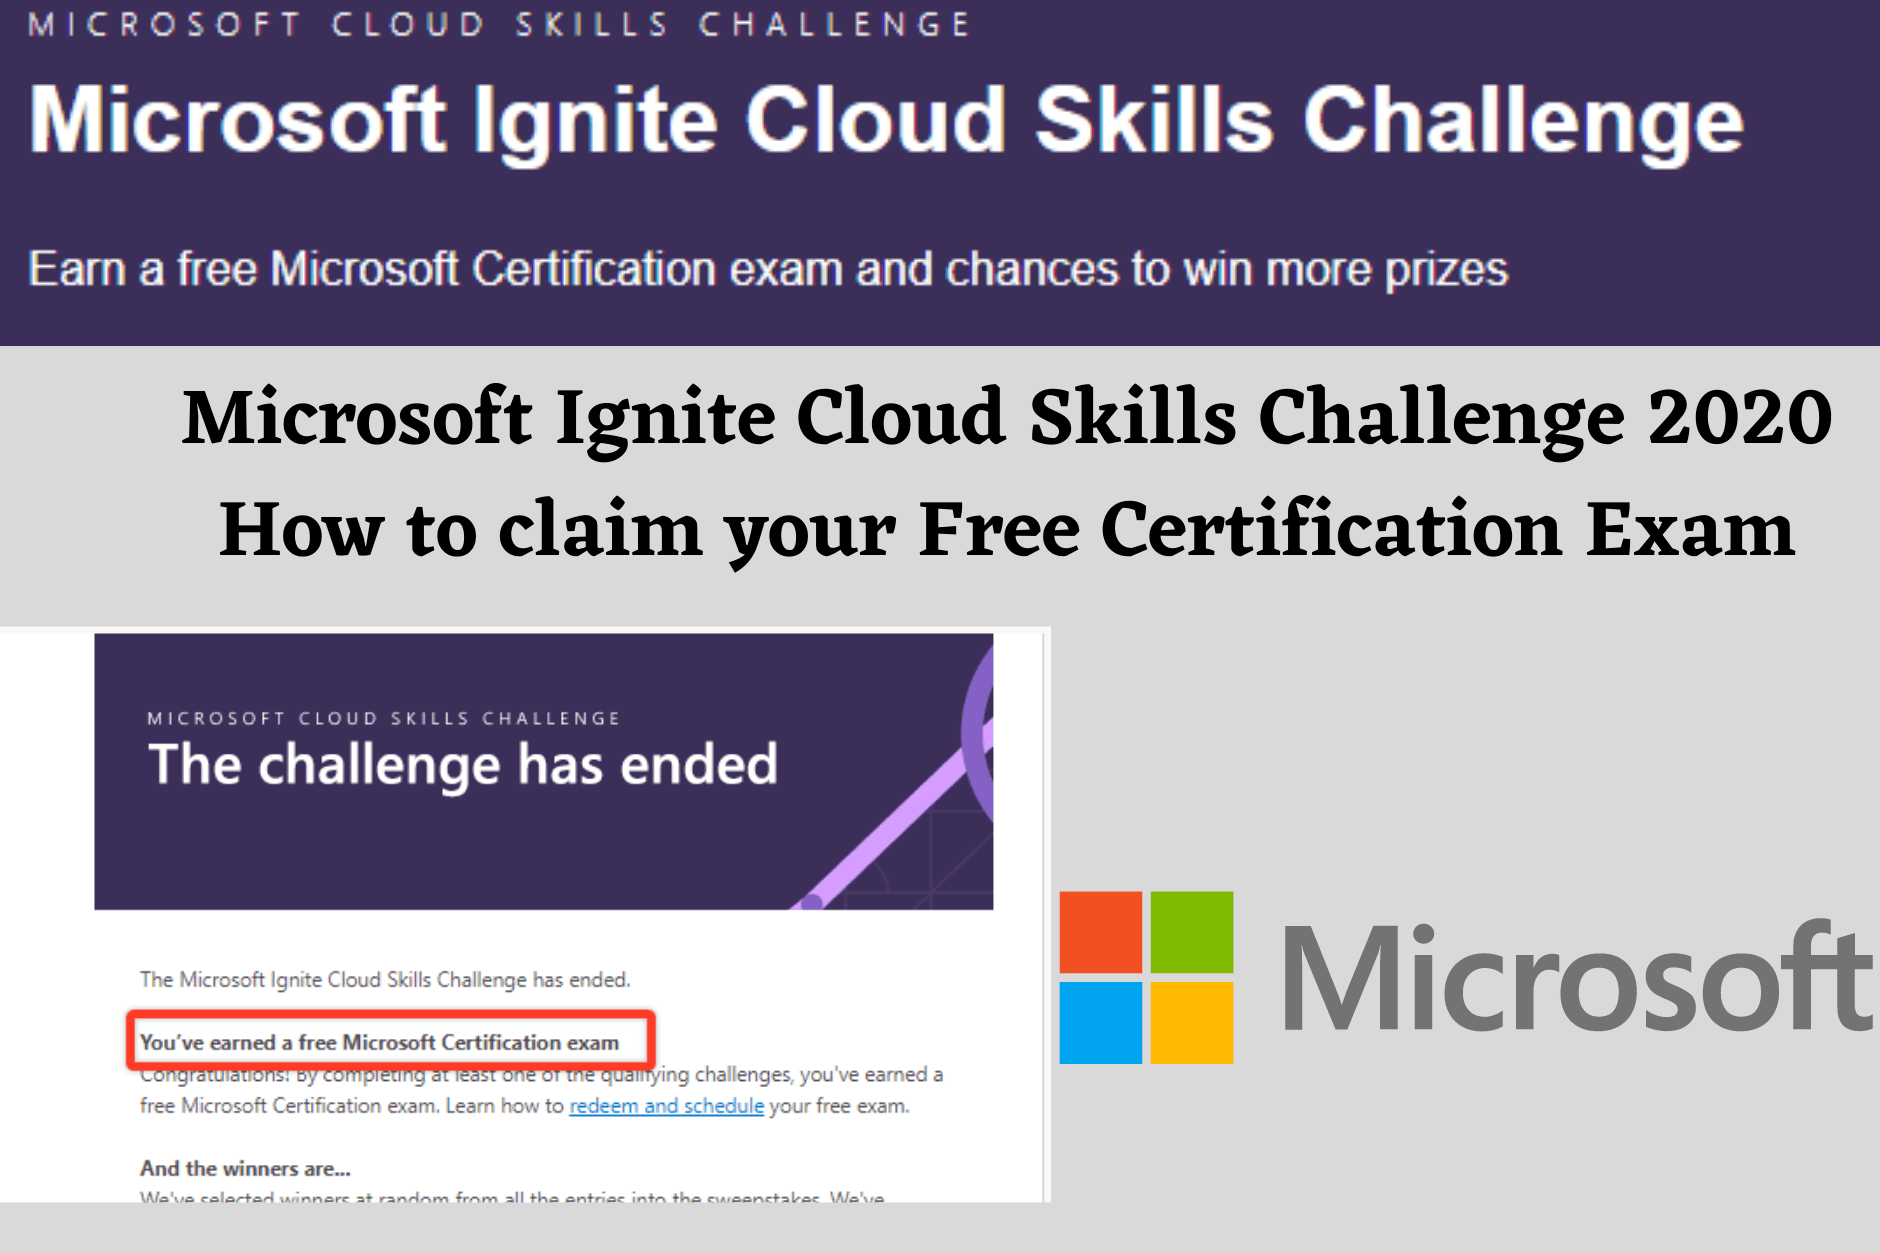 Microsoft Ignite Cloud Skills Challenge 2020: How to claim your Free Certification Exam